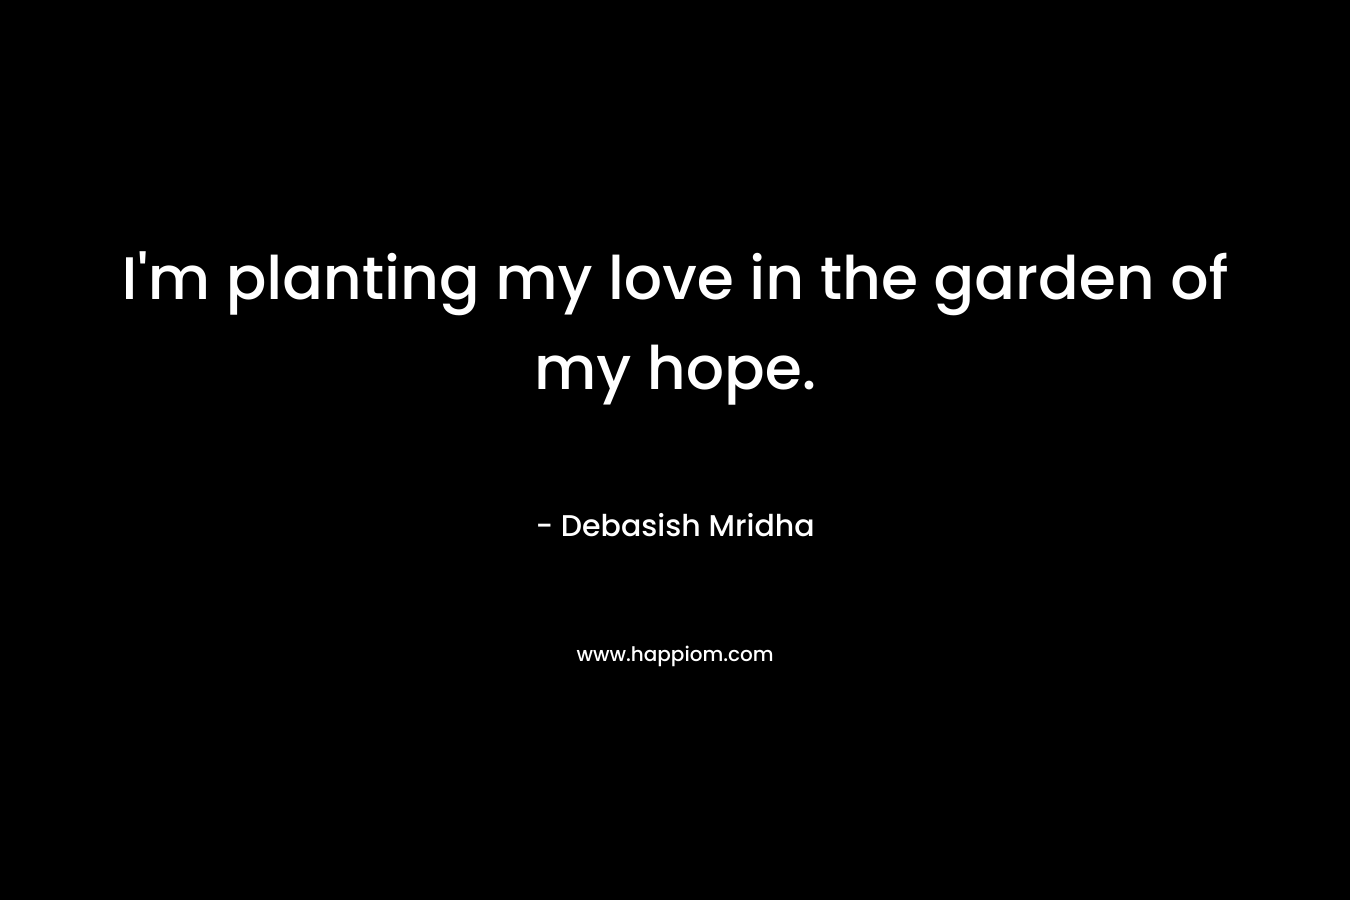 I'm planting my love in the garden of my hope.